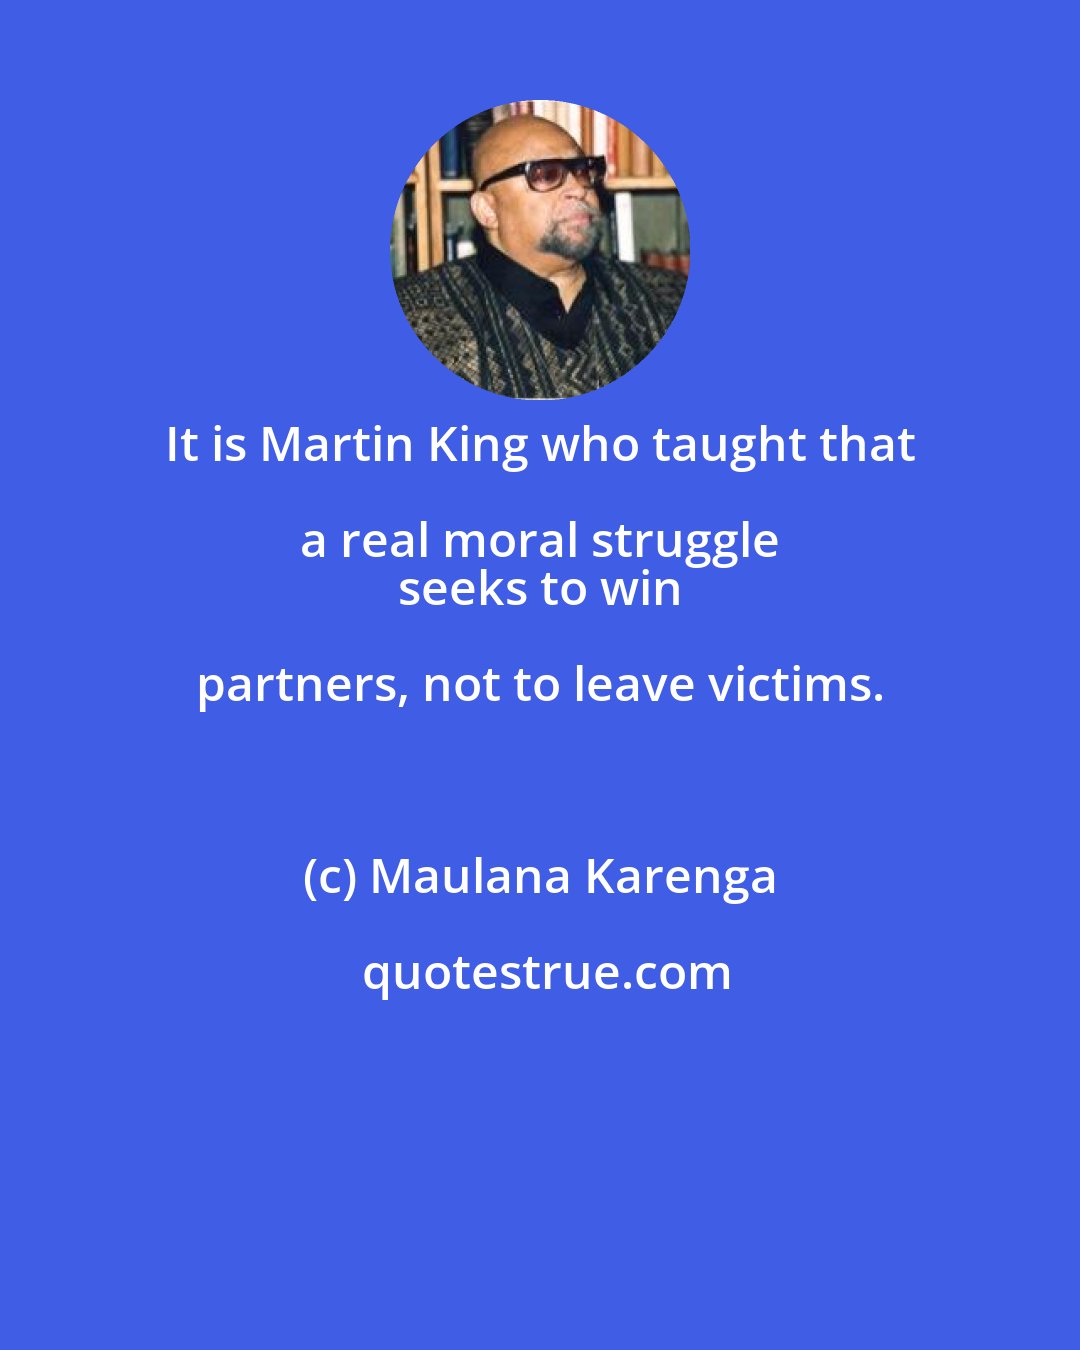 Maulana Karenga: It is Martin King who taught that a real moral struggle 
 seeks to win partners, not to leave victims.